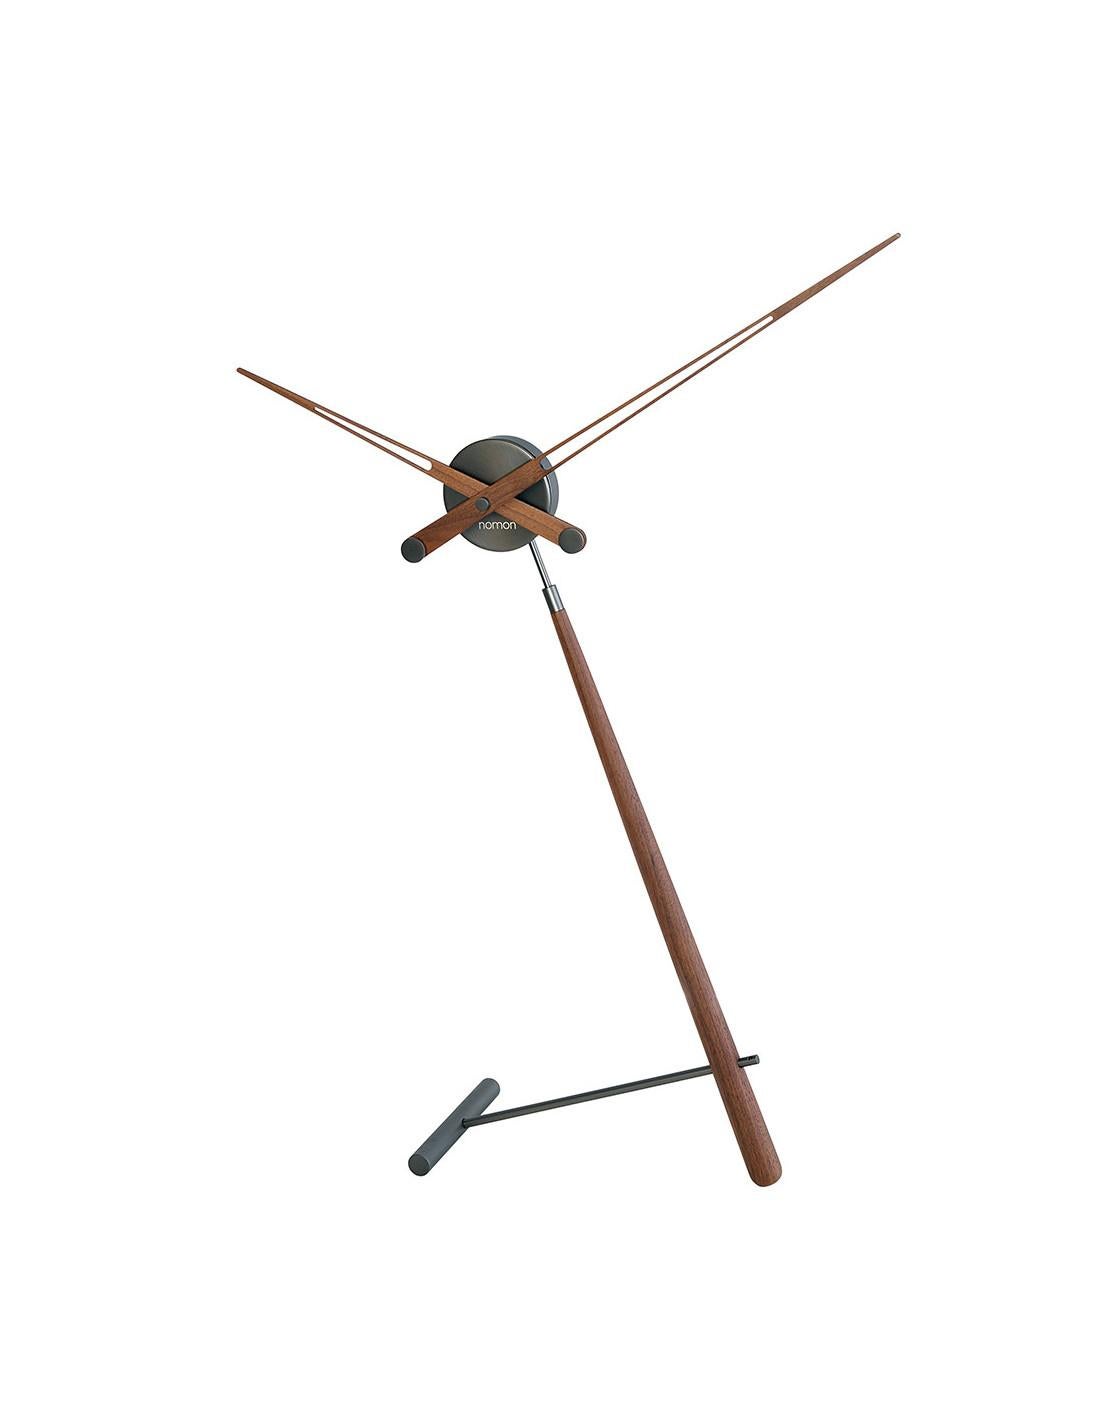 Puntero T table clock is a clock whose design makes it an elegant and stylish decorative piece.
The German UTS mechanism guarantees the accuracy of its operation over the years.
Puntero T table clock : Box in graphite finished brass, hands and